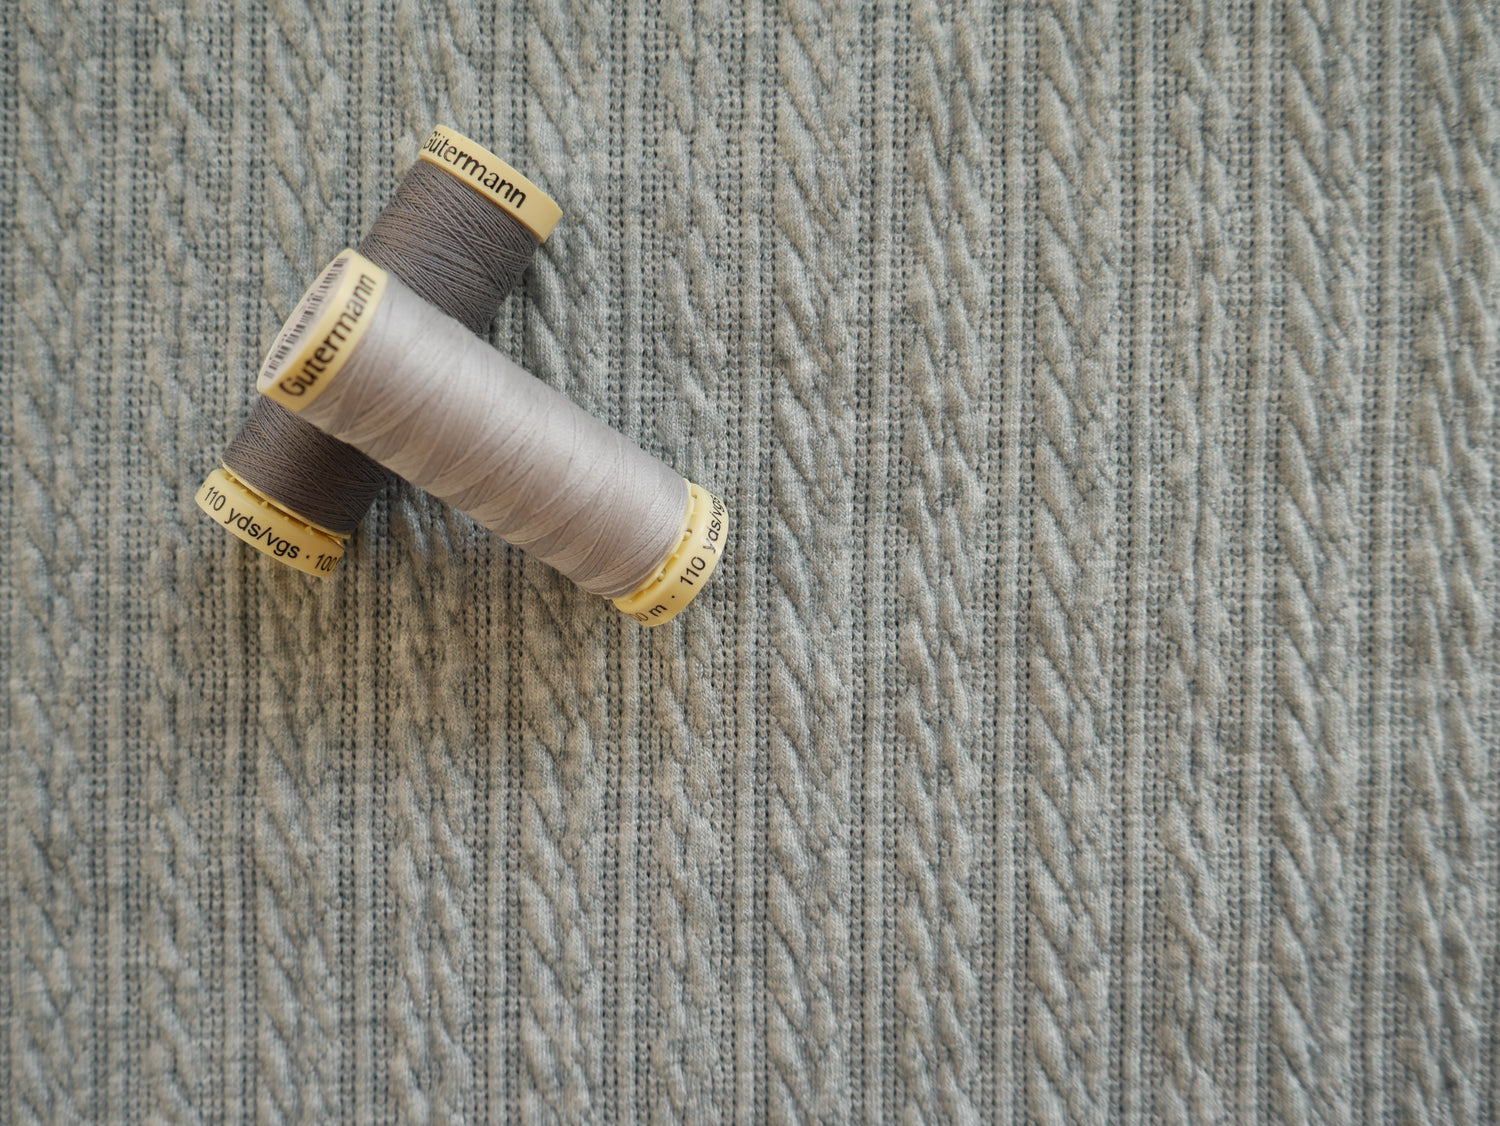 Cable Jacquard Knit Fabric in Grey £19.00-Jersey Fabric-Flying Bobbins Haberdashery